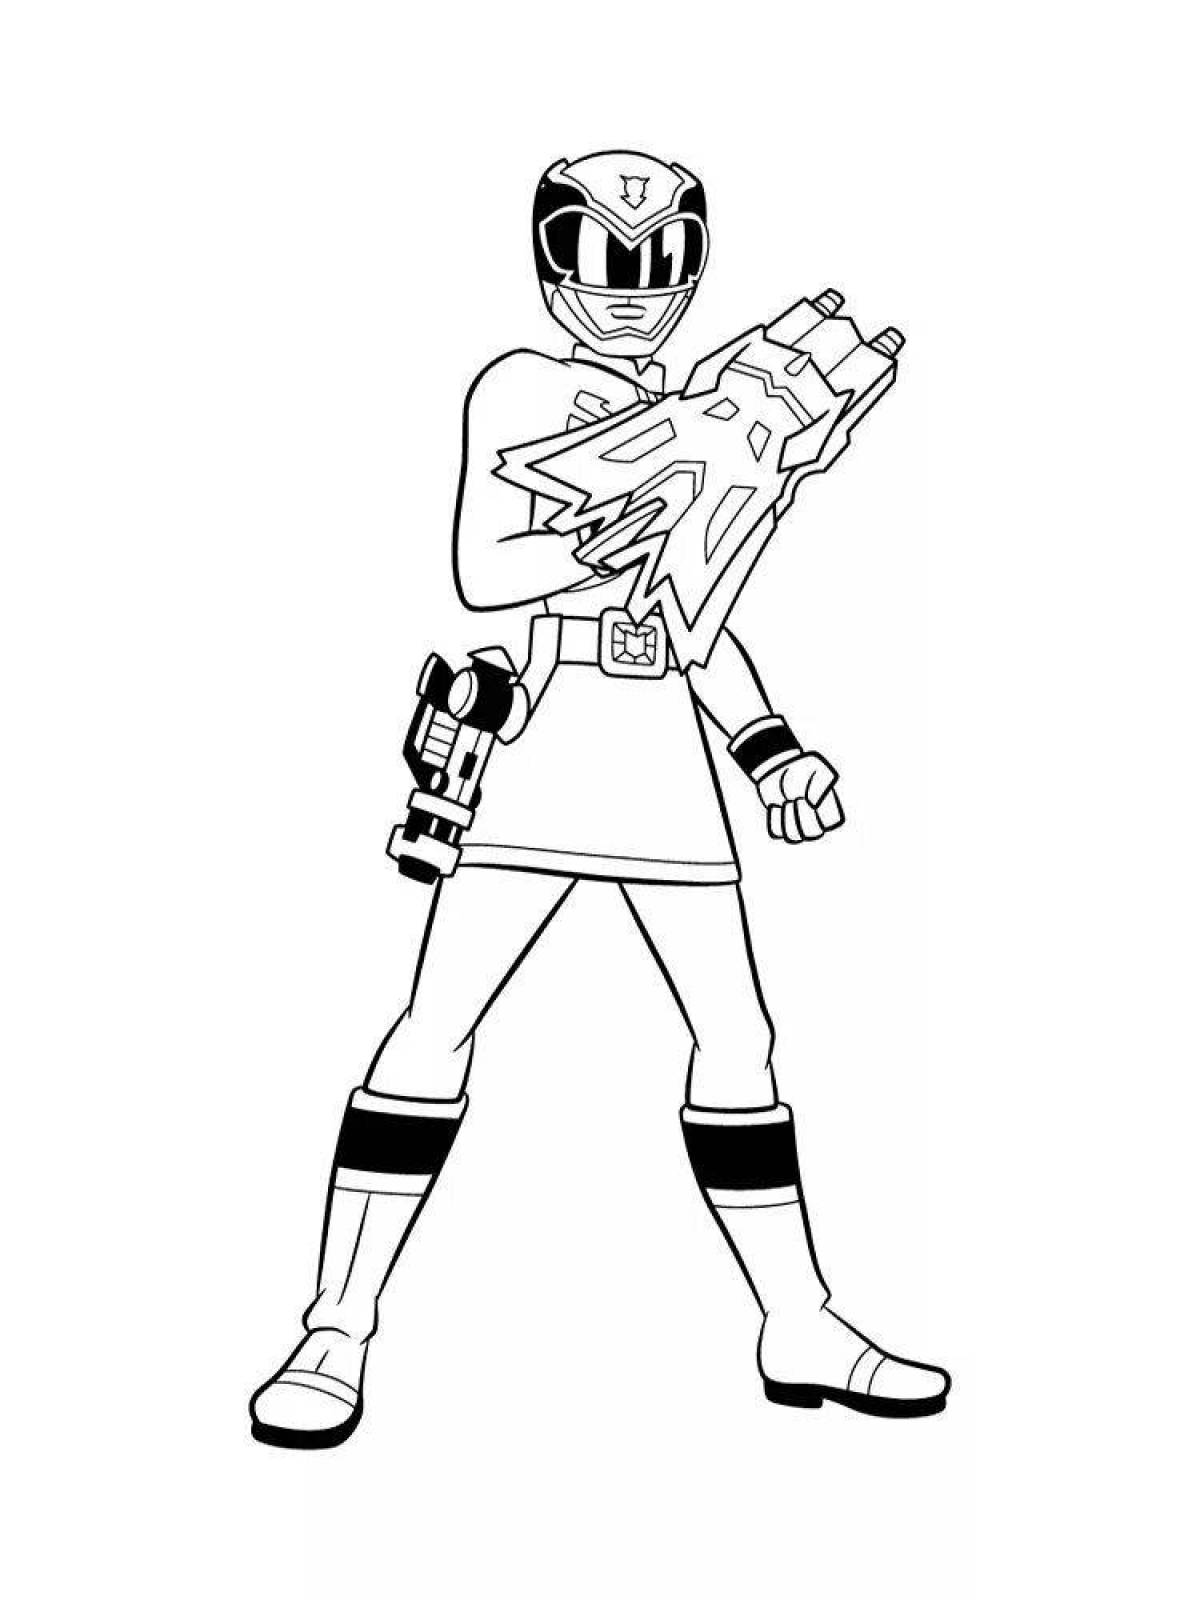 Exciting power rangers coloring pages